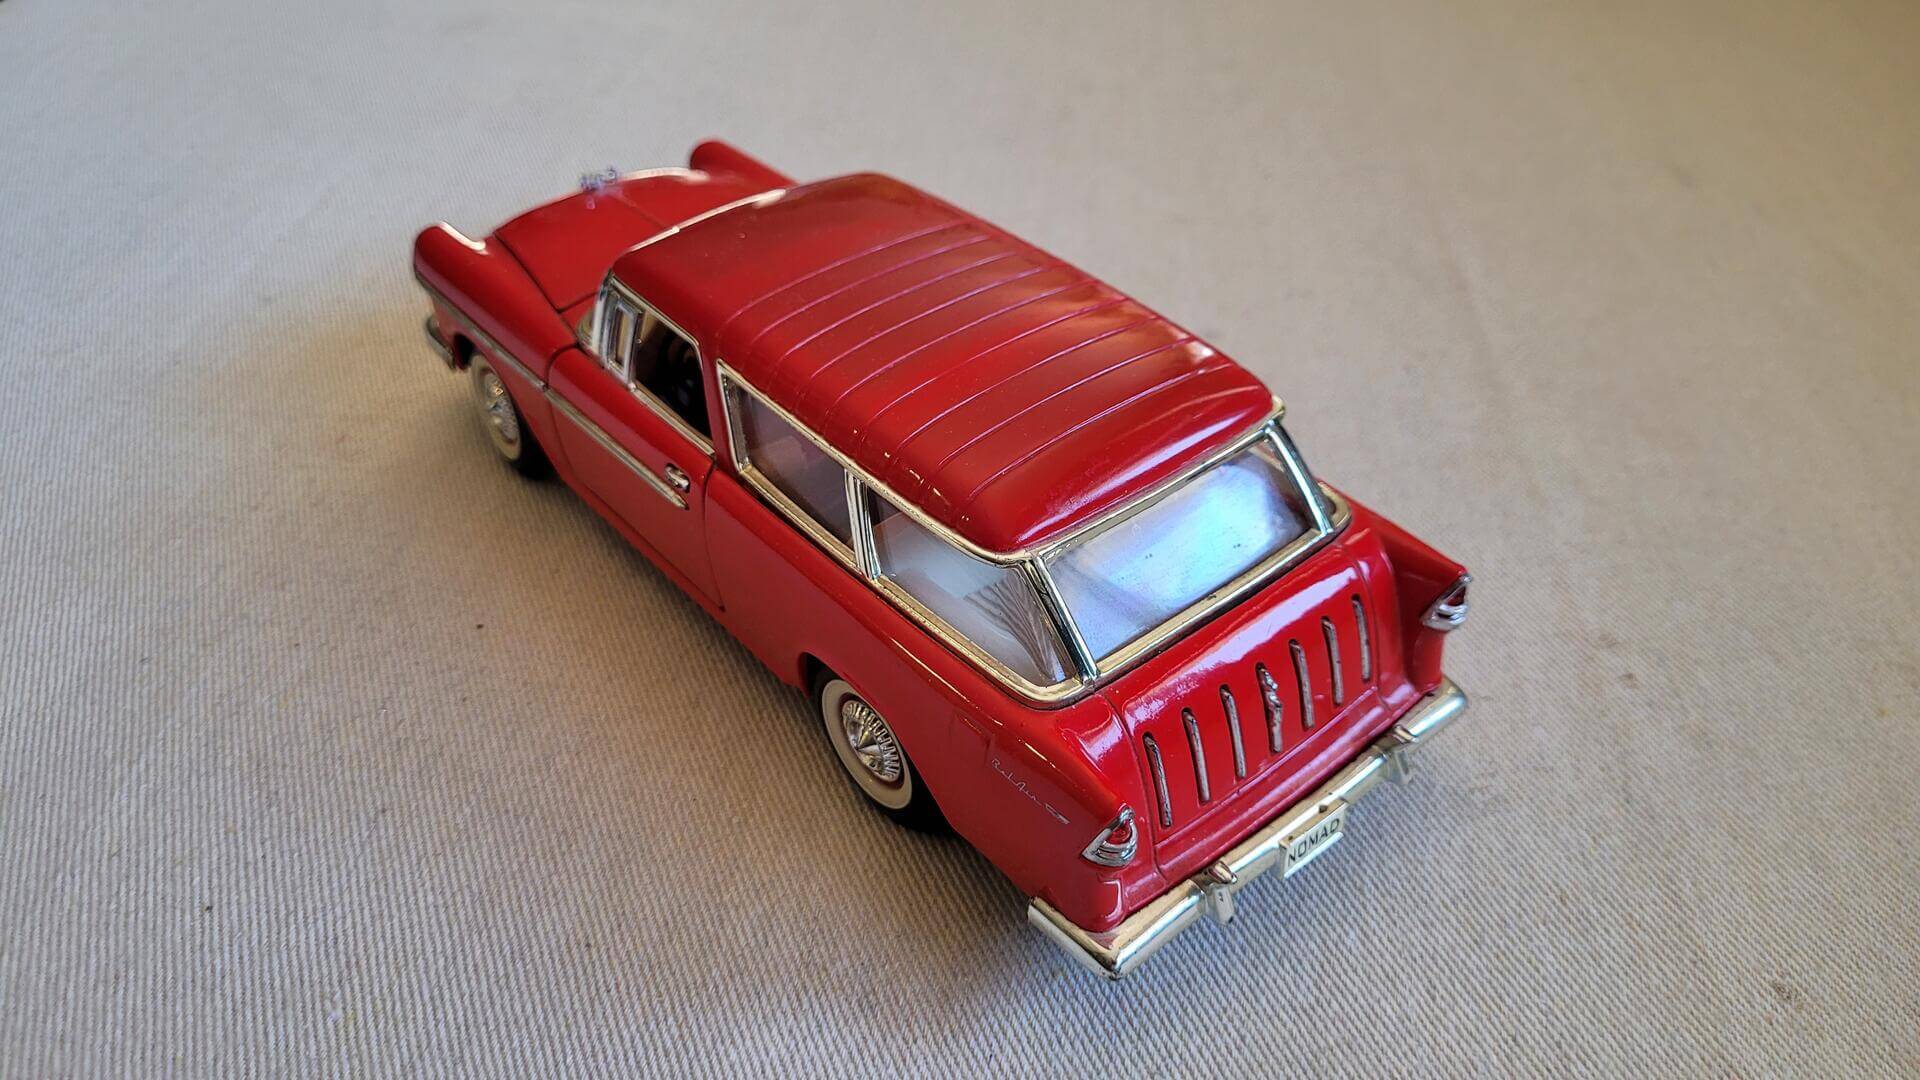 Beautiful 1955 red Chevy Bel Air Nomad 1:24 scale diecast model car toy